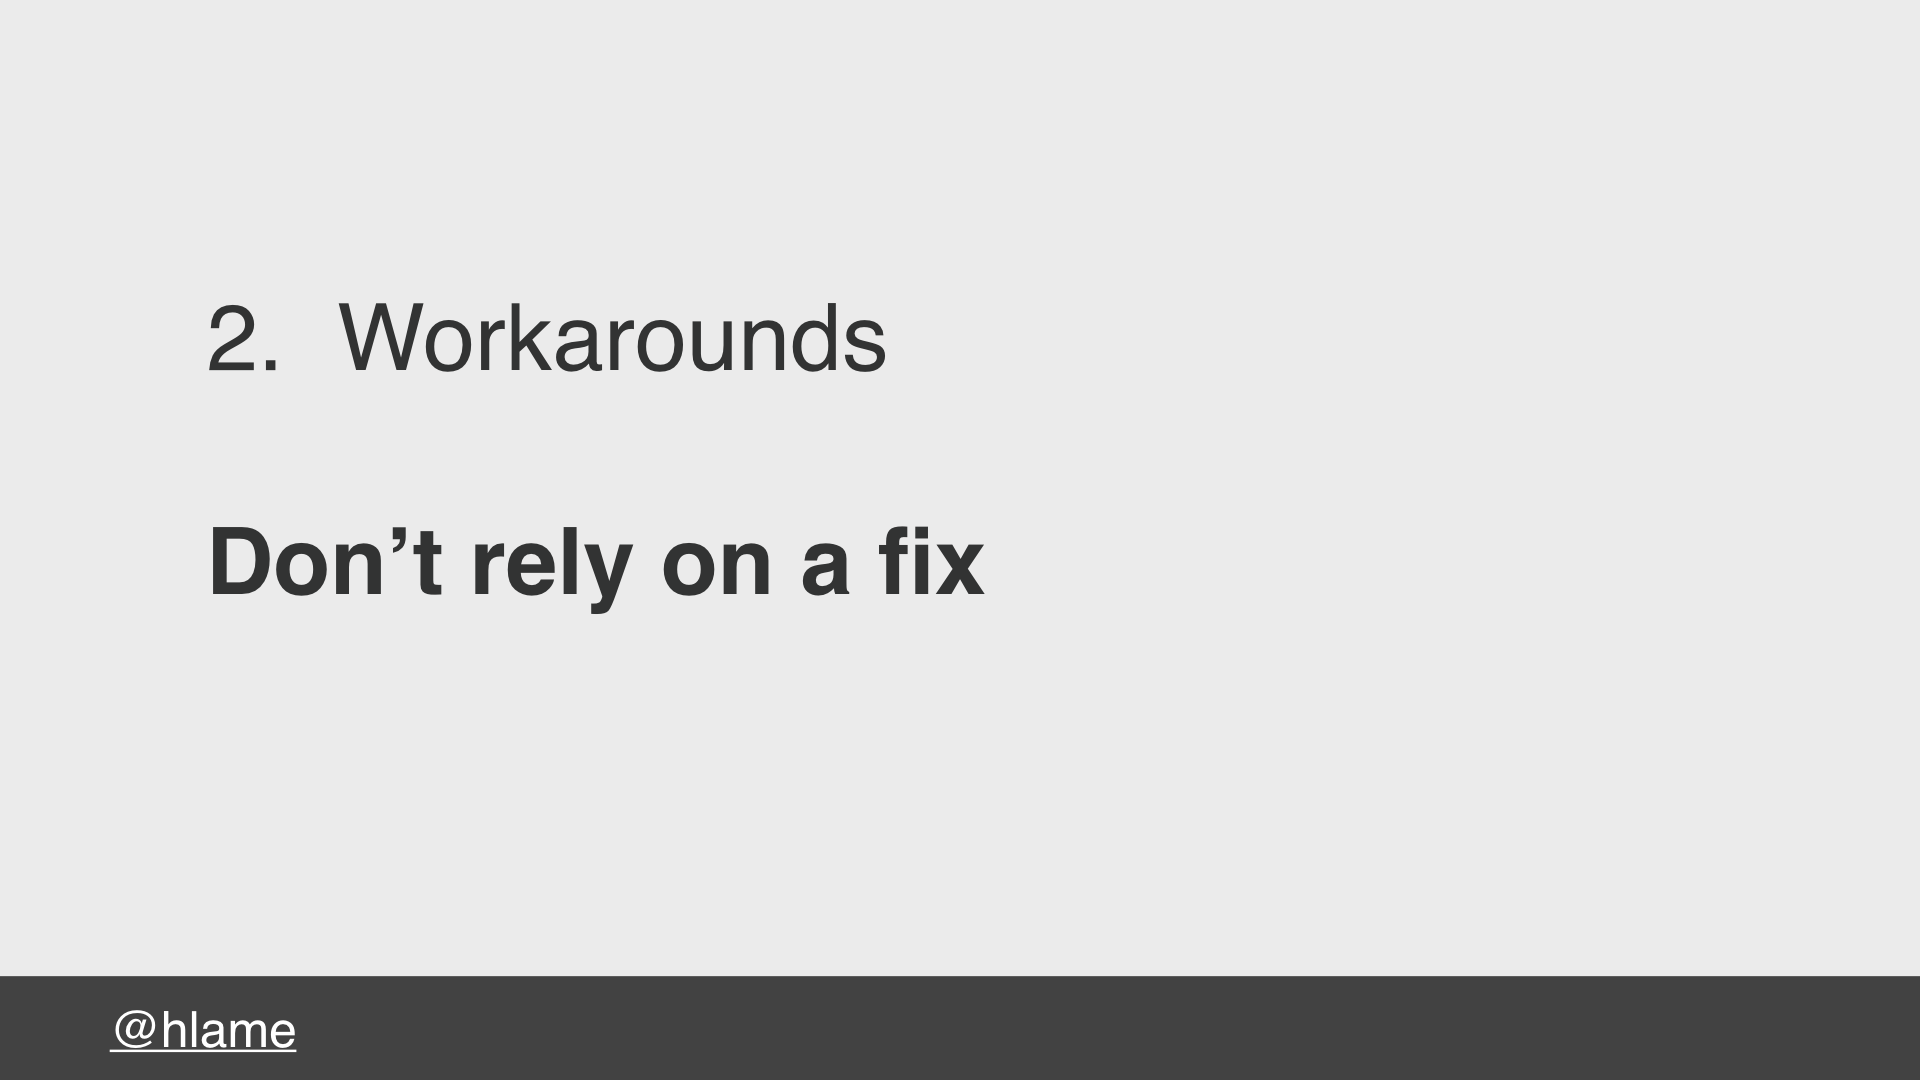 text: 2. Workarounds, Donʼt rely on a fix